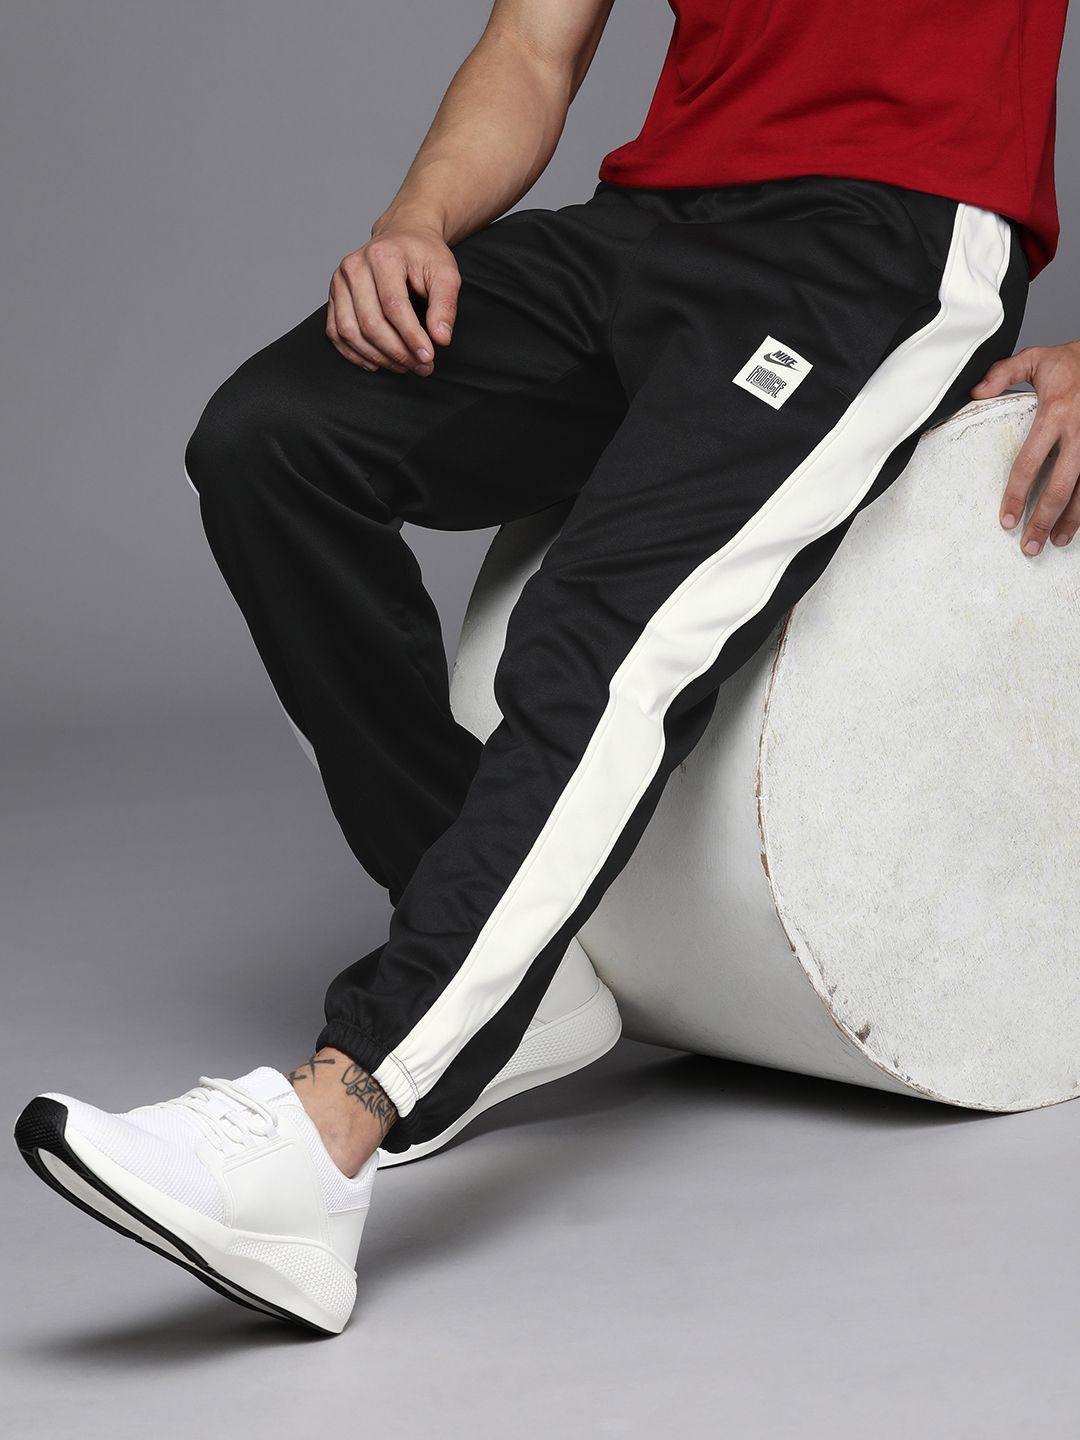 nike-men-therma-fit-starting-5-basketball-fleece-applique-detail-striped-joggers-pants